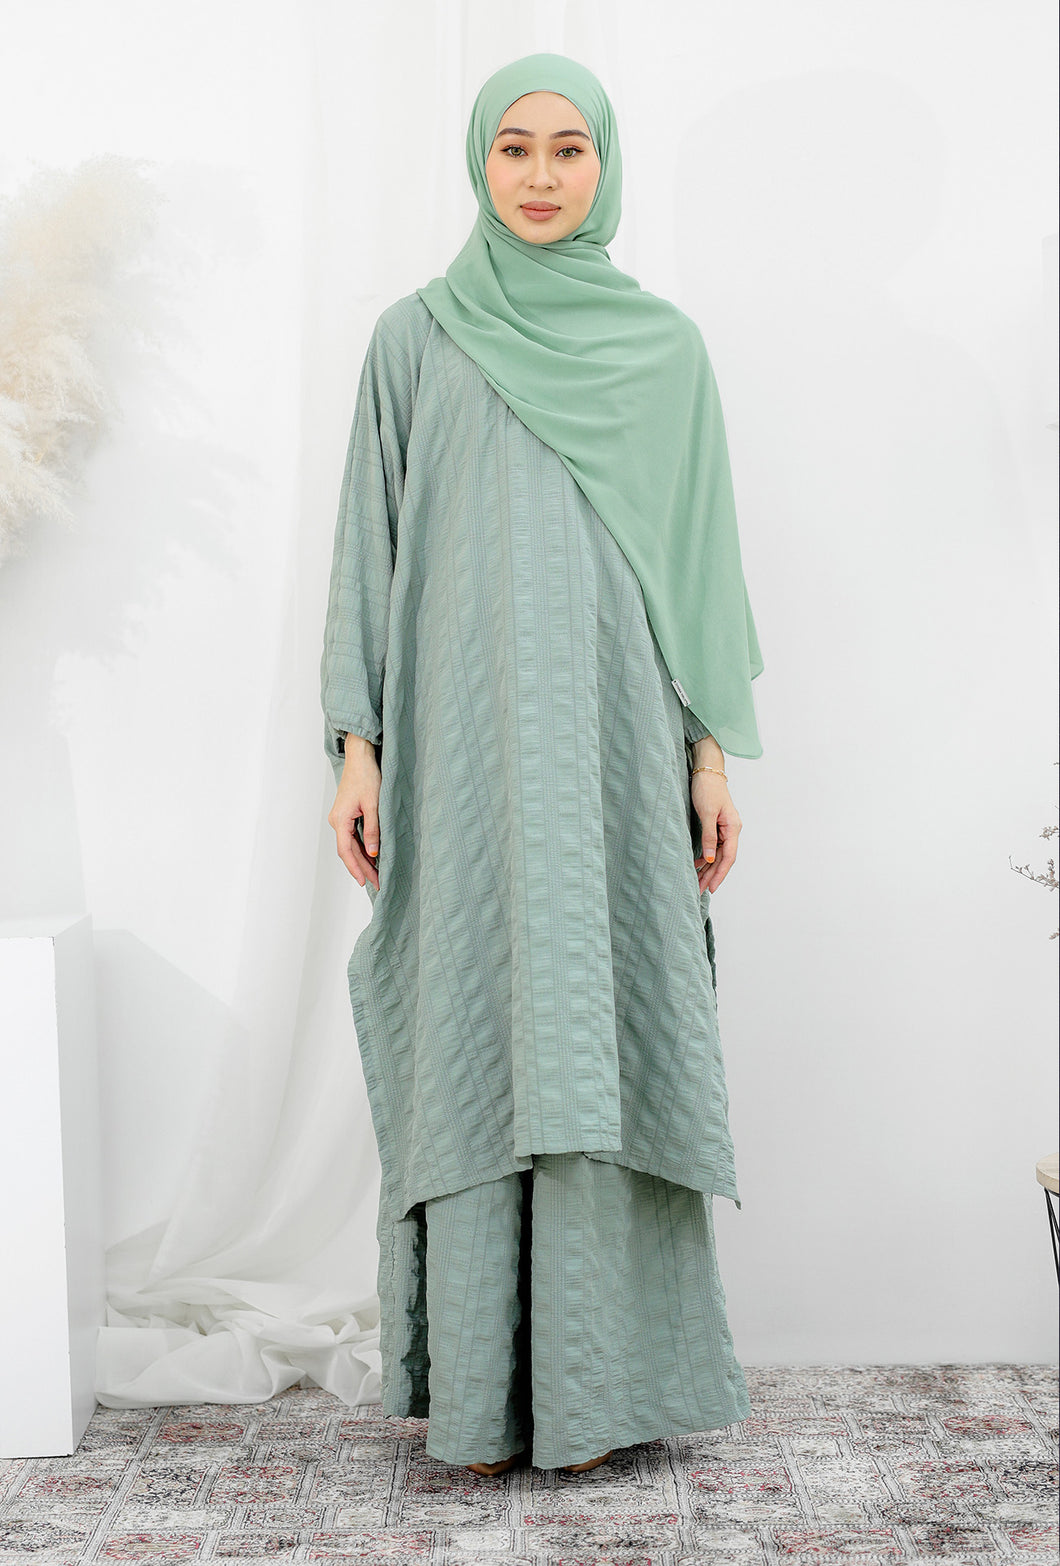 Rest & Relax Series - Serene in Pastel Green